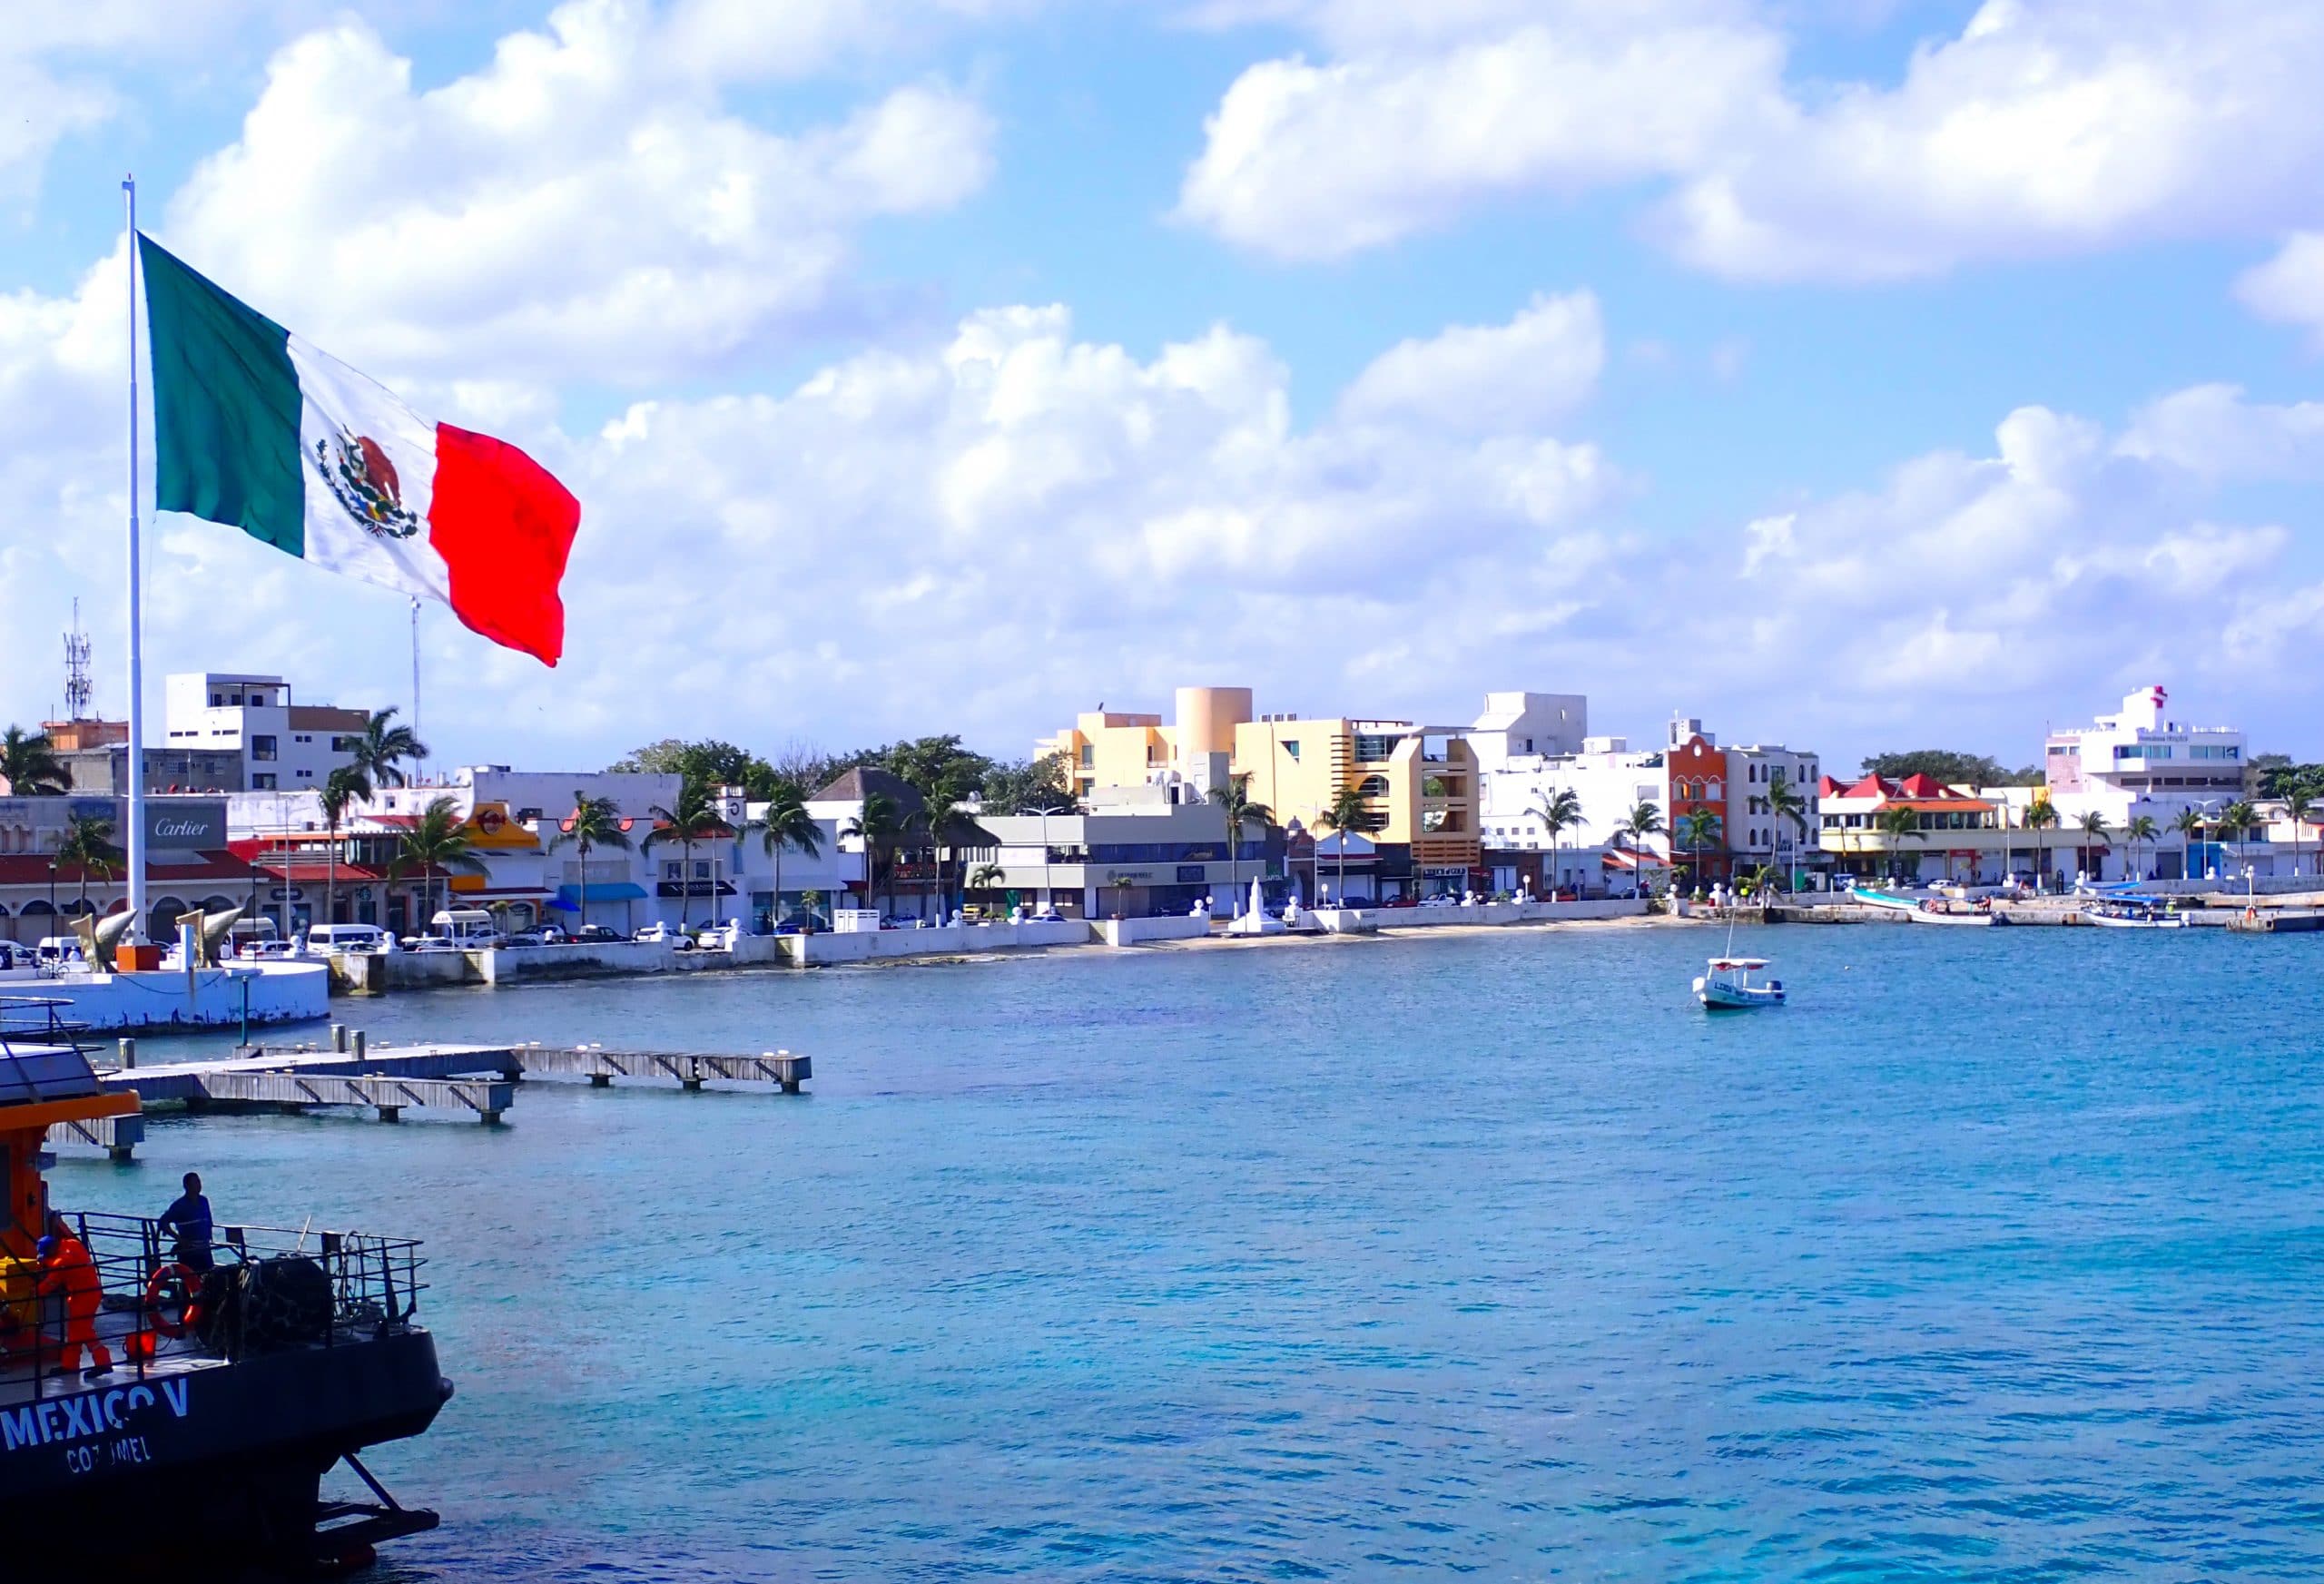 Pretty view of downtown Cozumel from blue water looking toward shoreline buildings